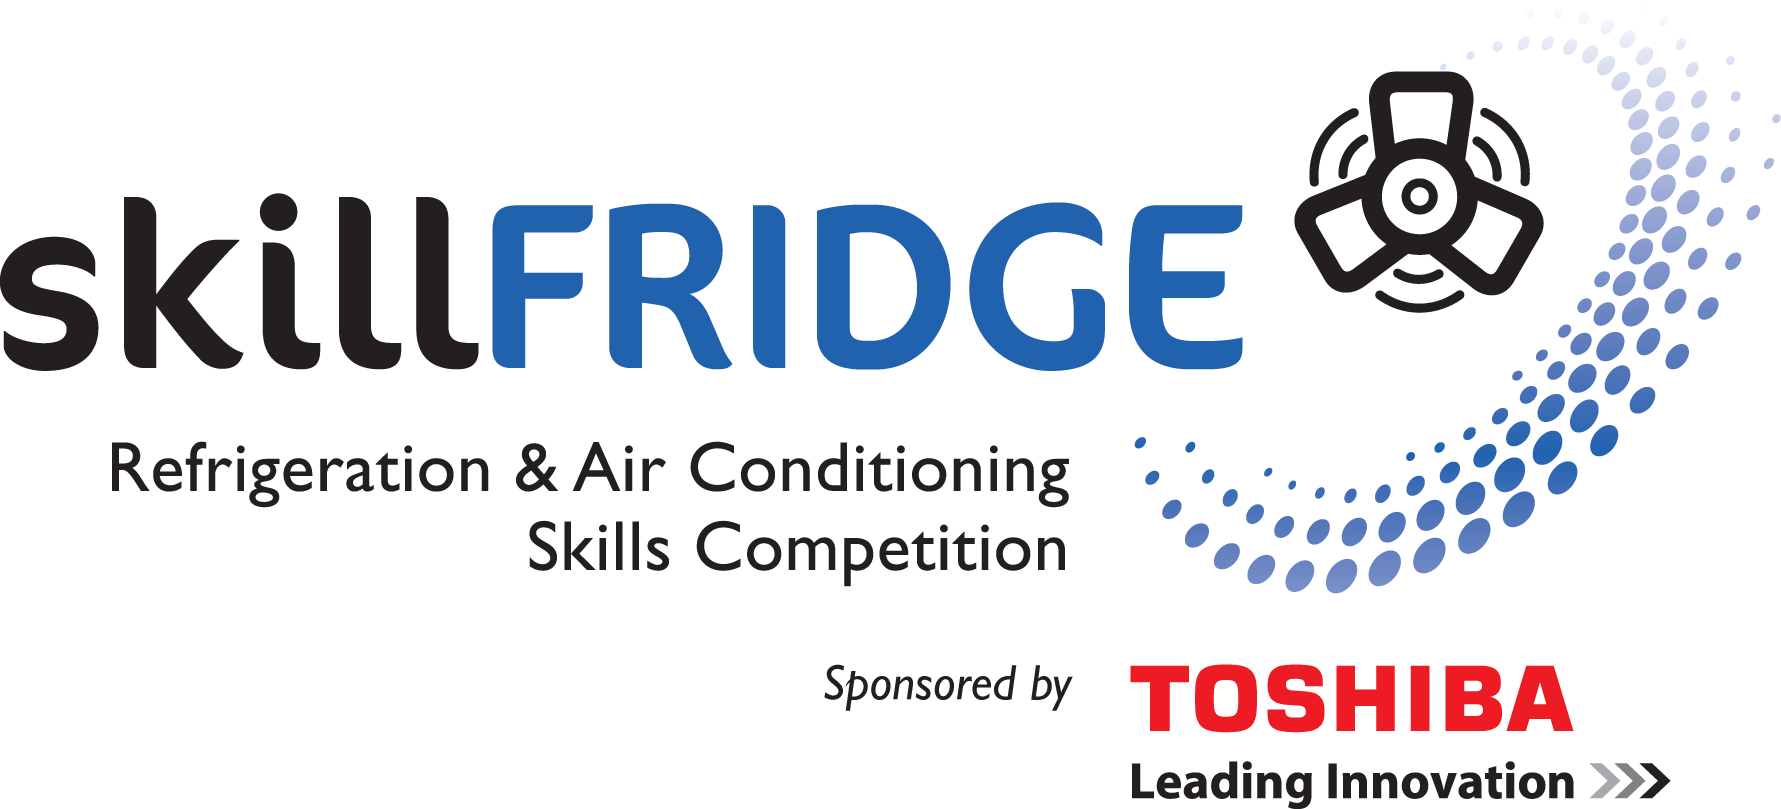 Top six SkillFRIDGE competitors announced as sights are set on the national final